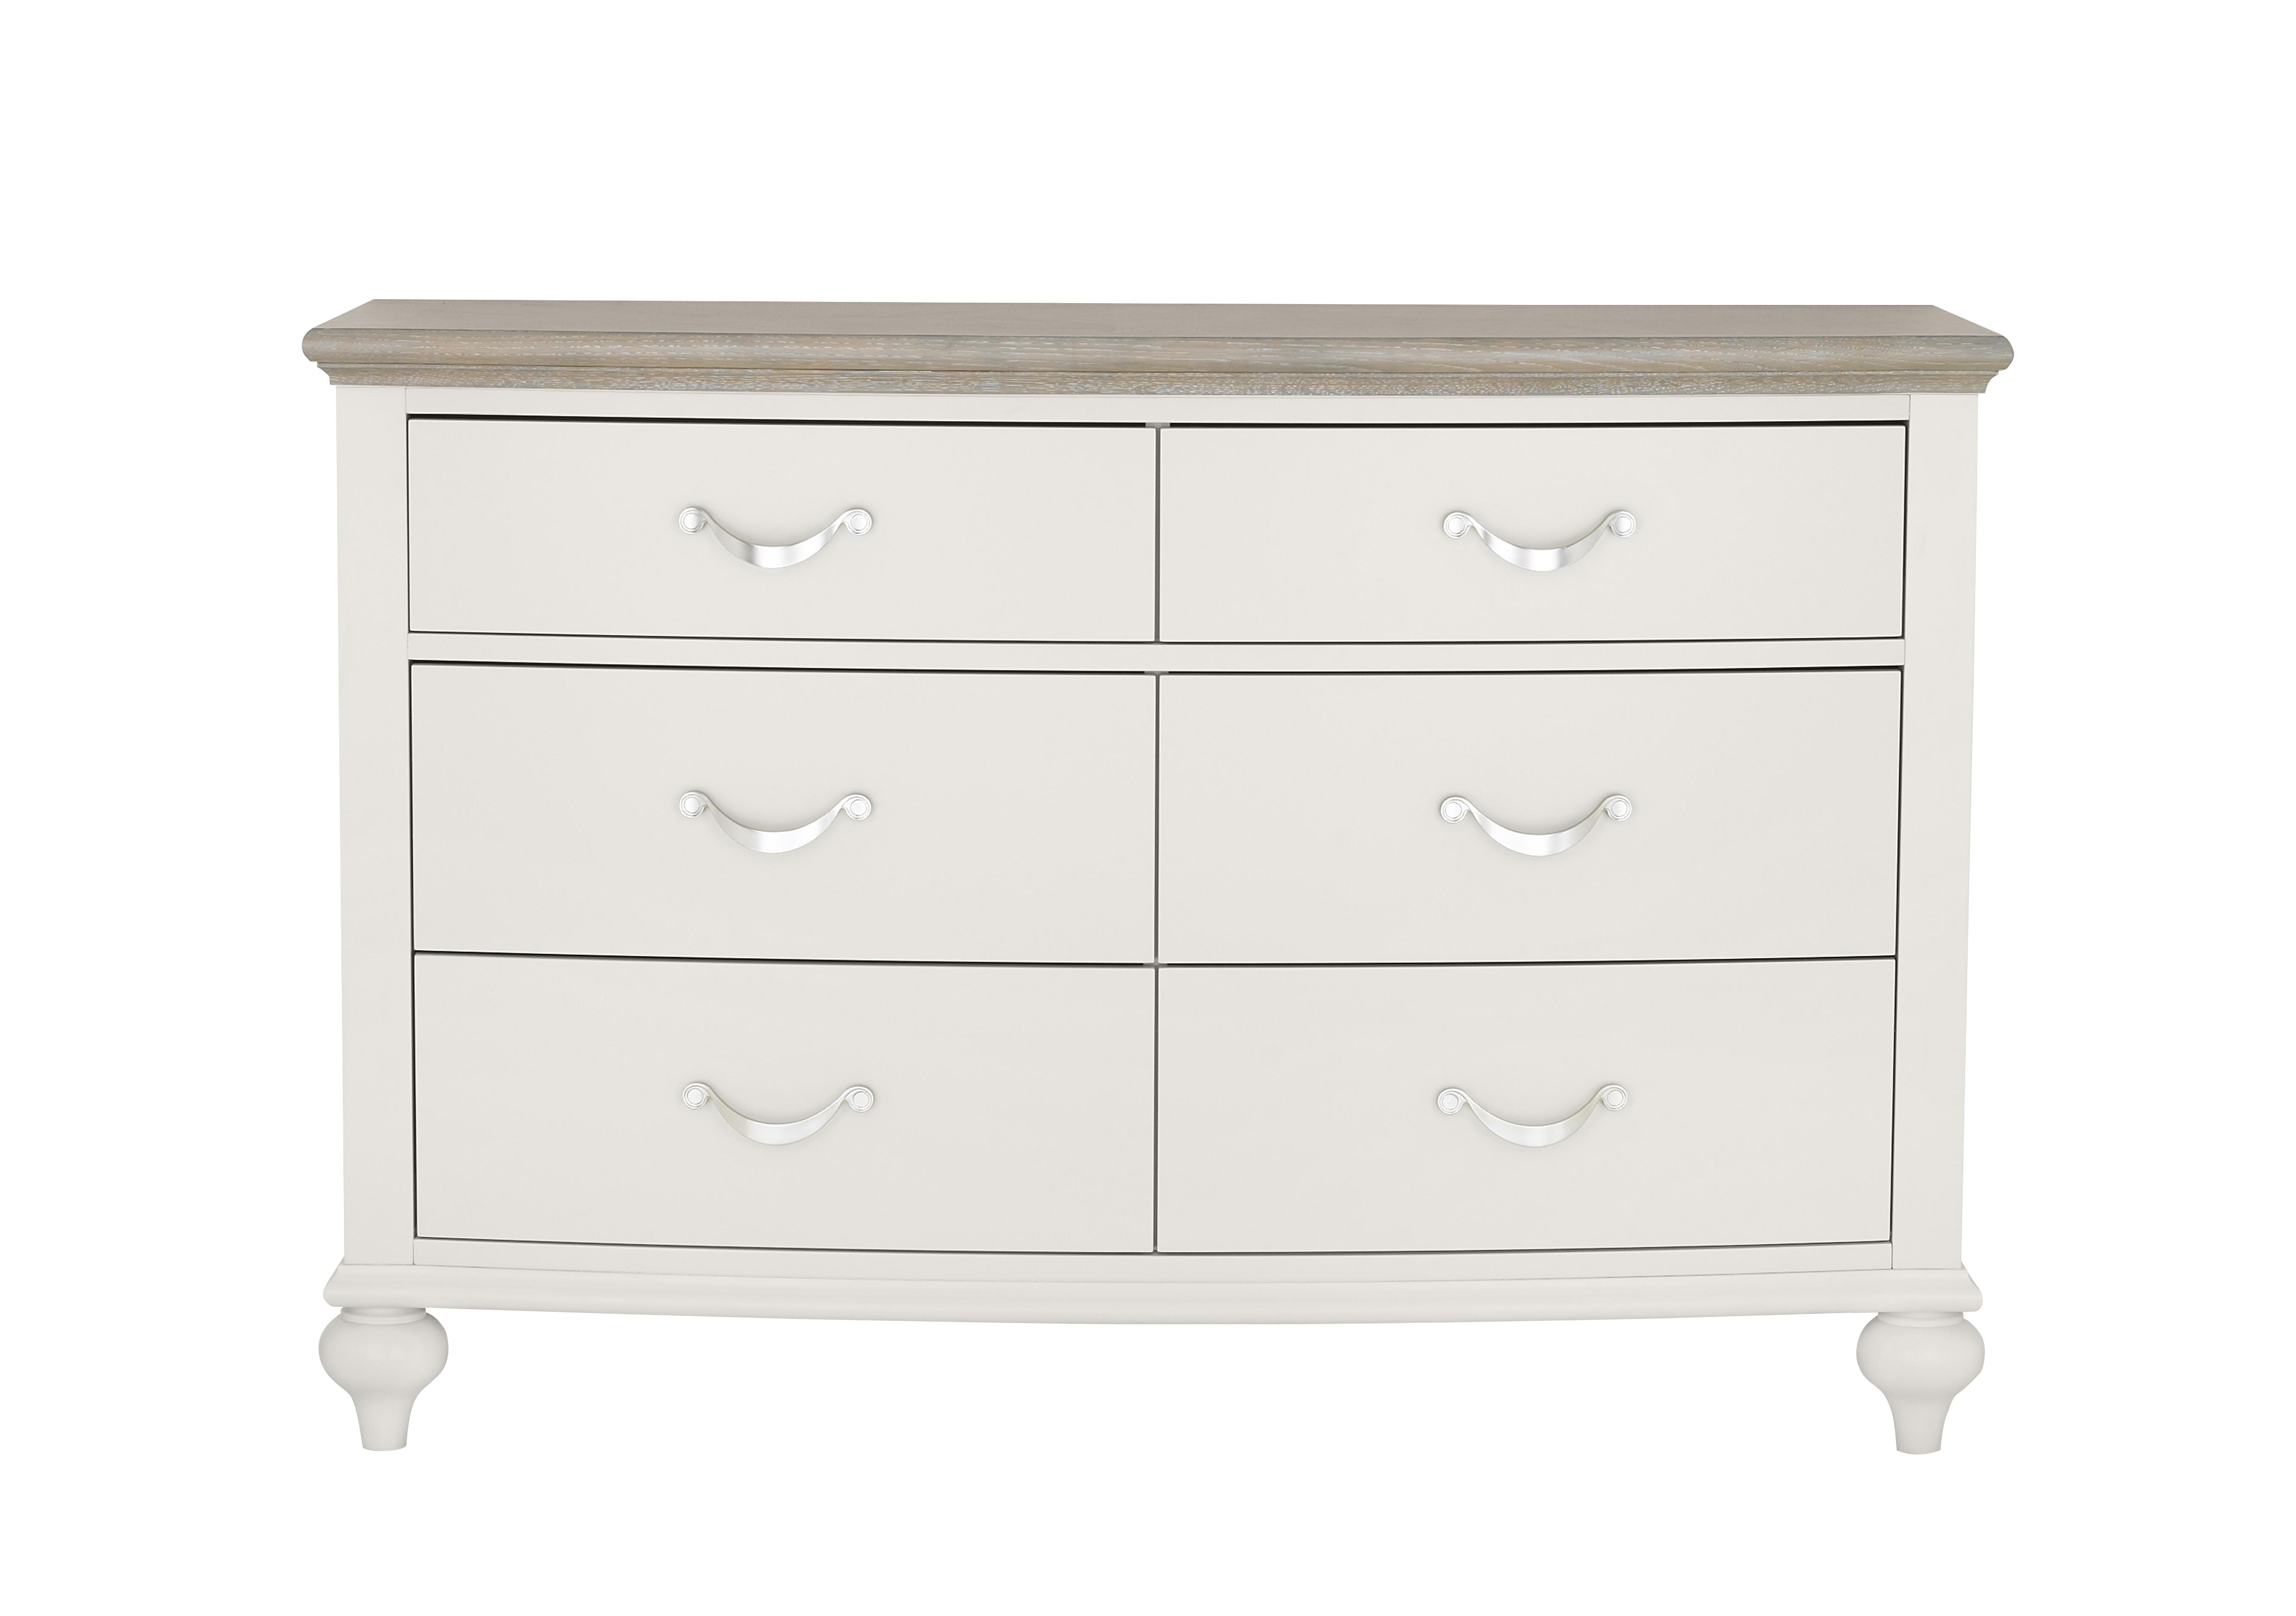 Annecy 6 Drawer Wide Chest in Soft Grey And Grey Washed Oak on Furniture Village